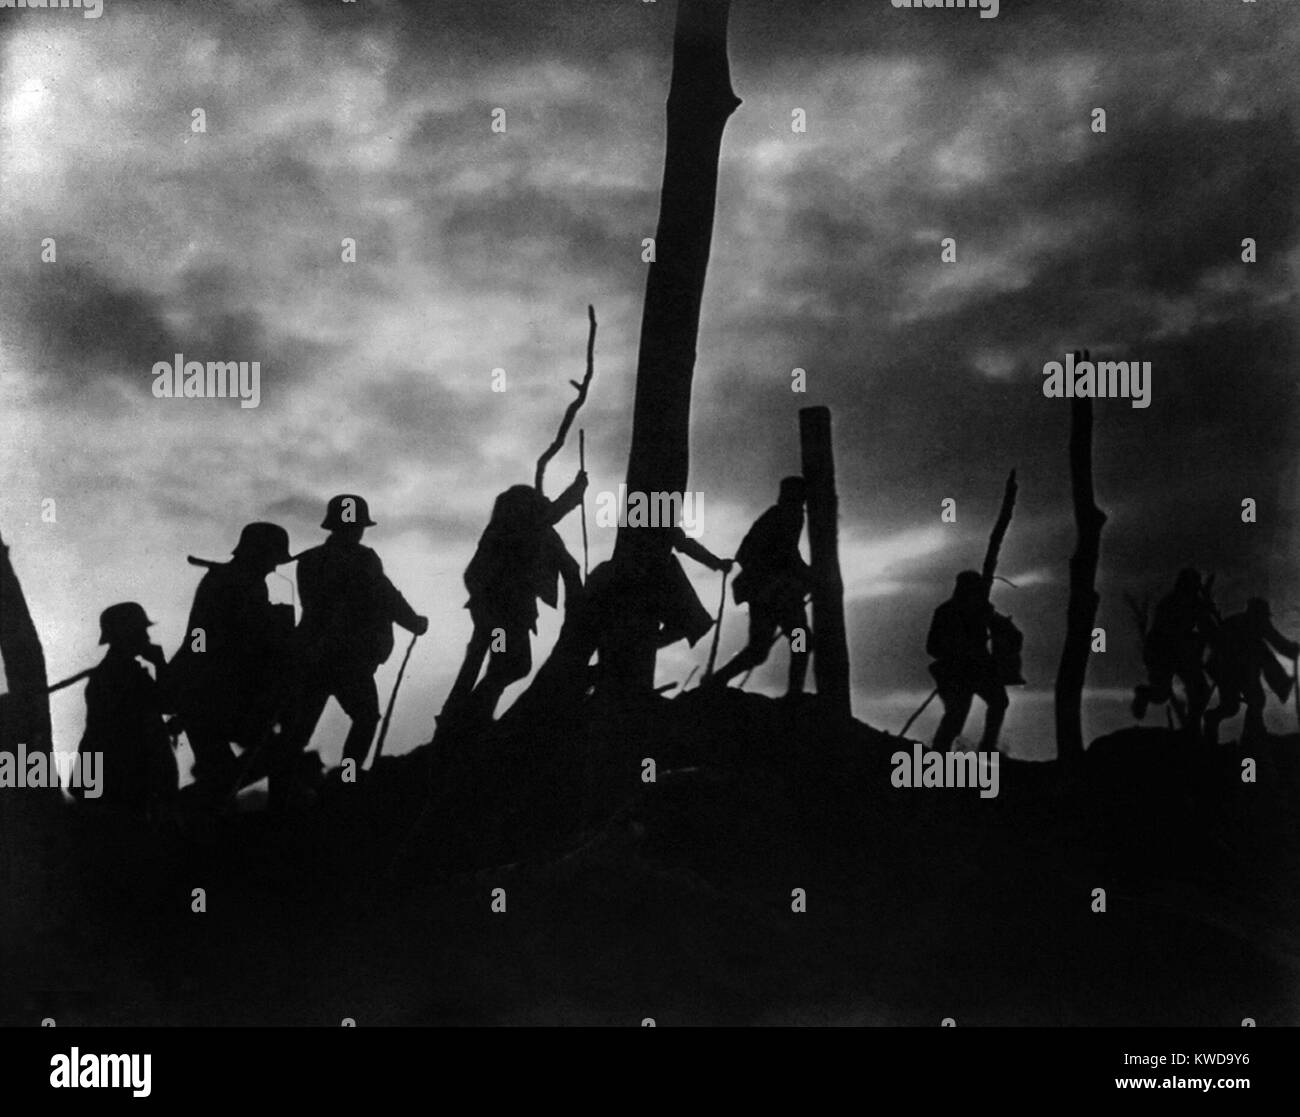 World War 1. Silhouette of German soldiers against a bombed out battlefield. Ca. 1916-18. (BSLOC 2013 1 1) Stock Photo